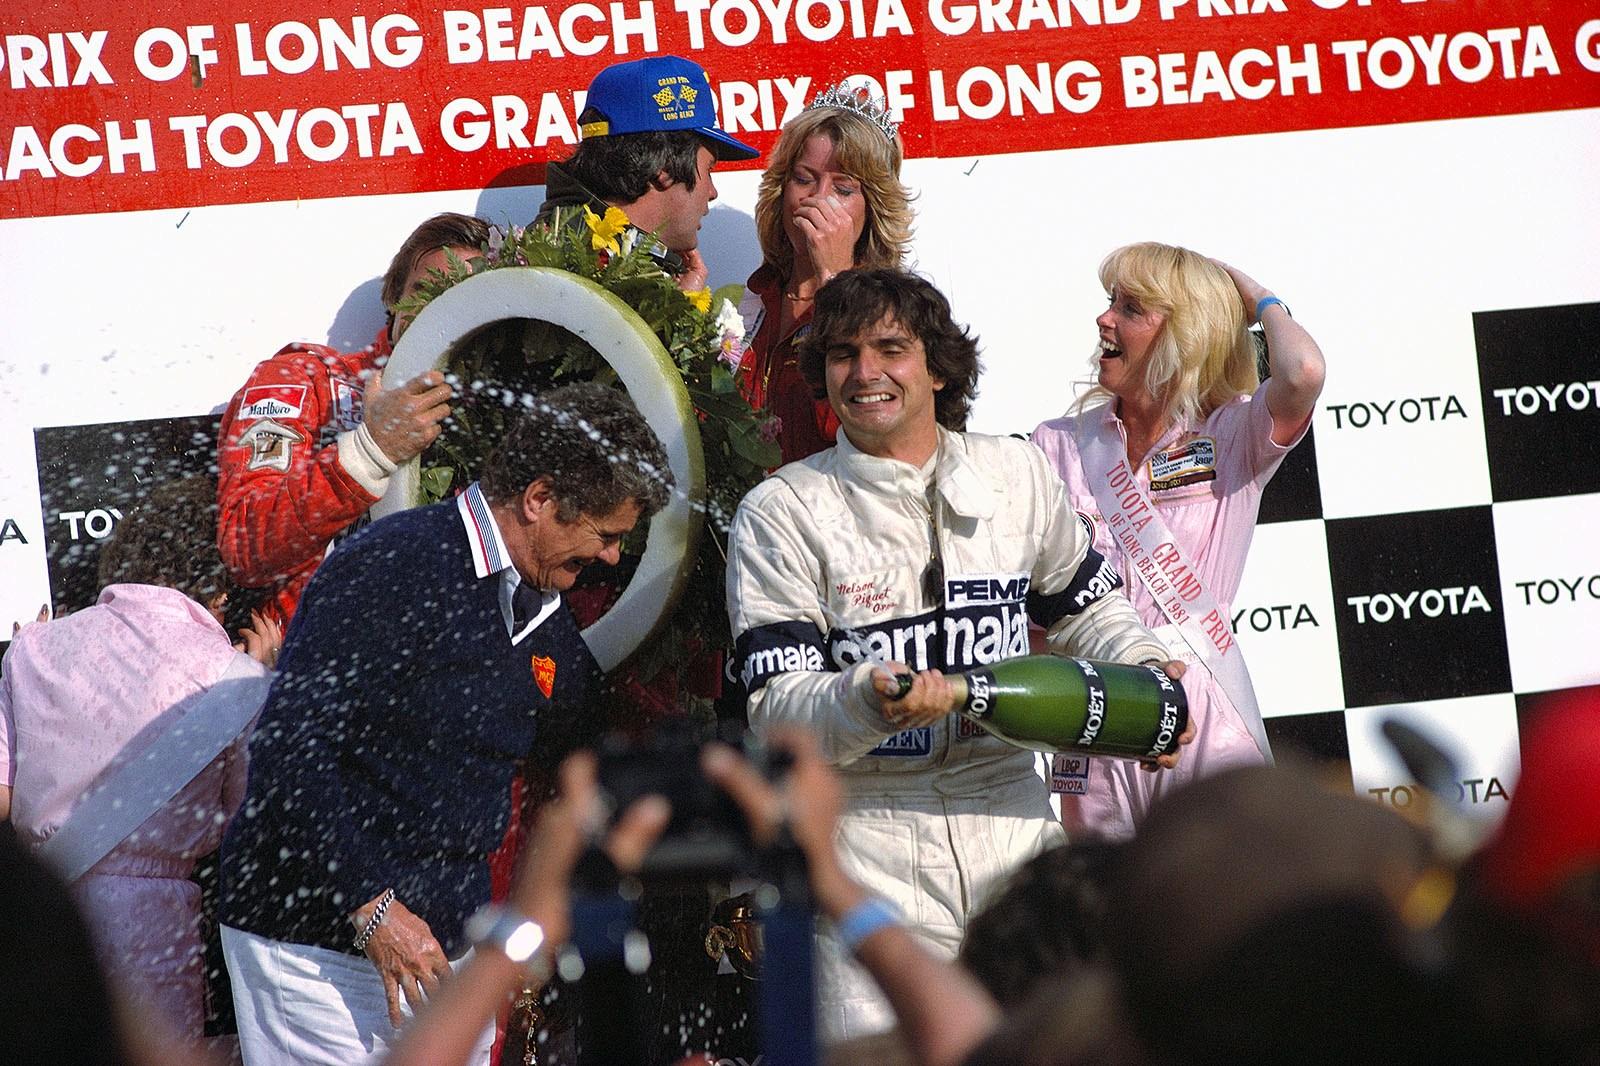 Nelson Piquet celebrates his 3rd place at the Long Beach GP, the 1981 season opener.